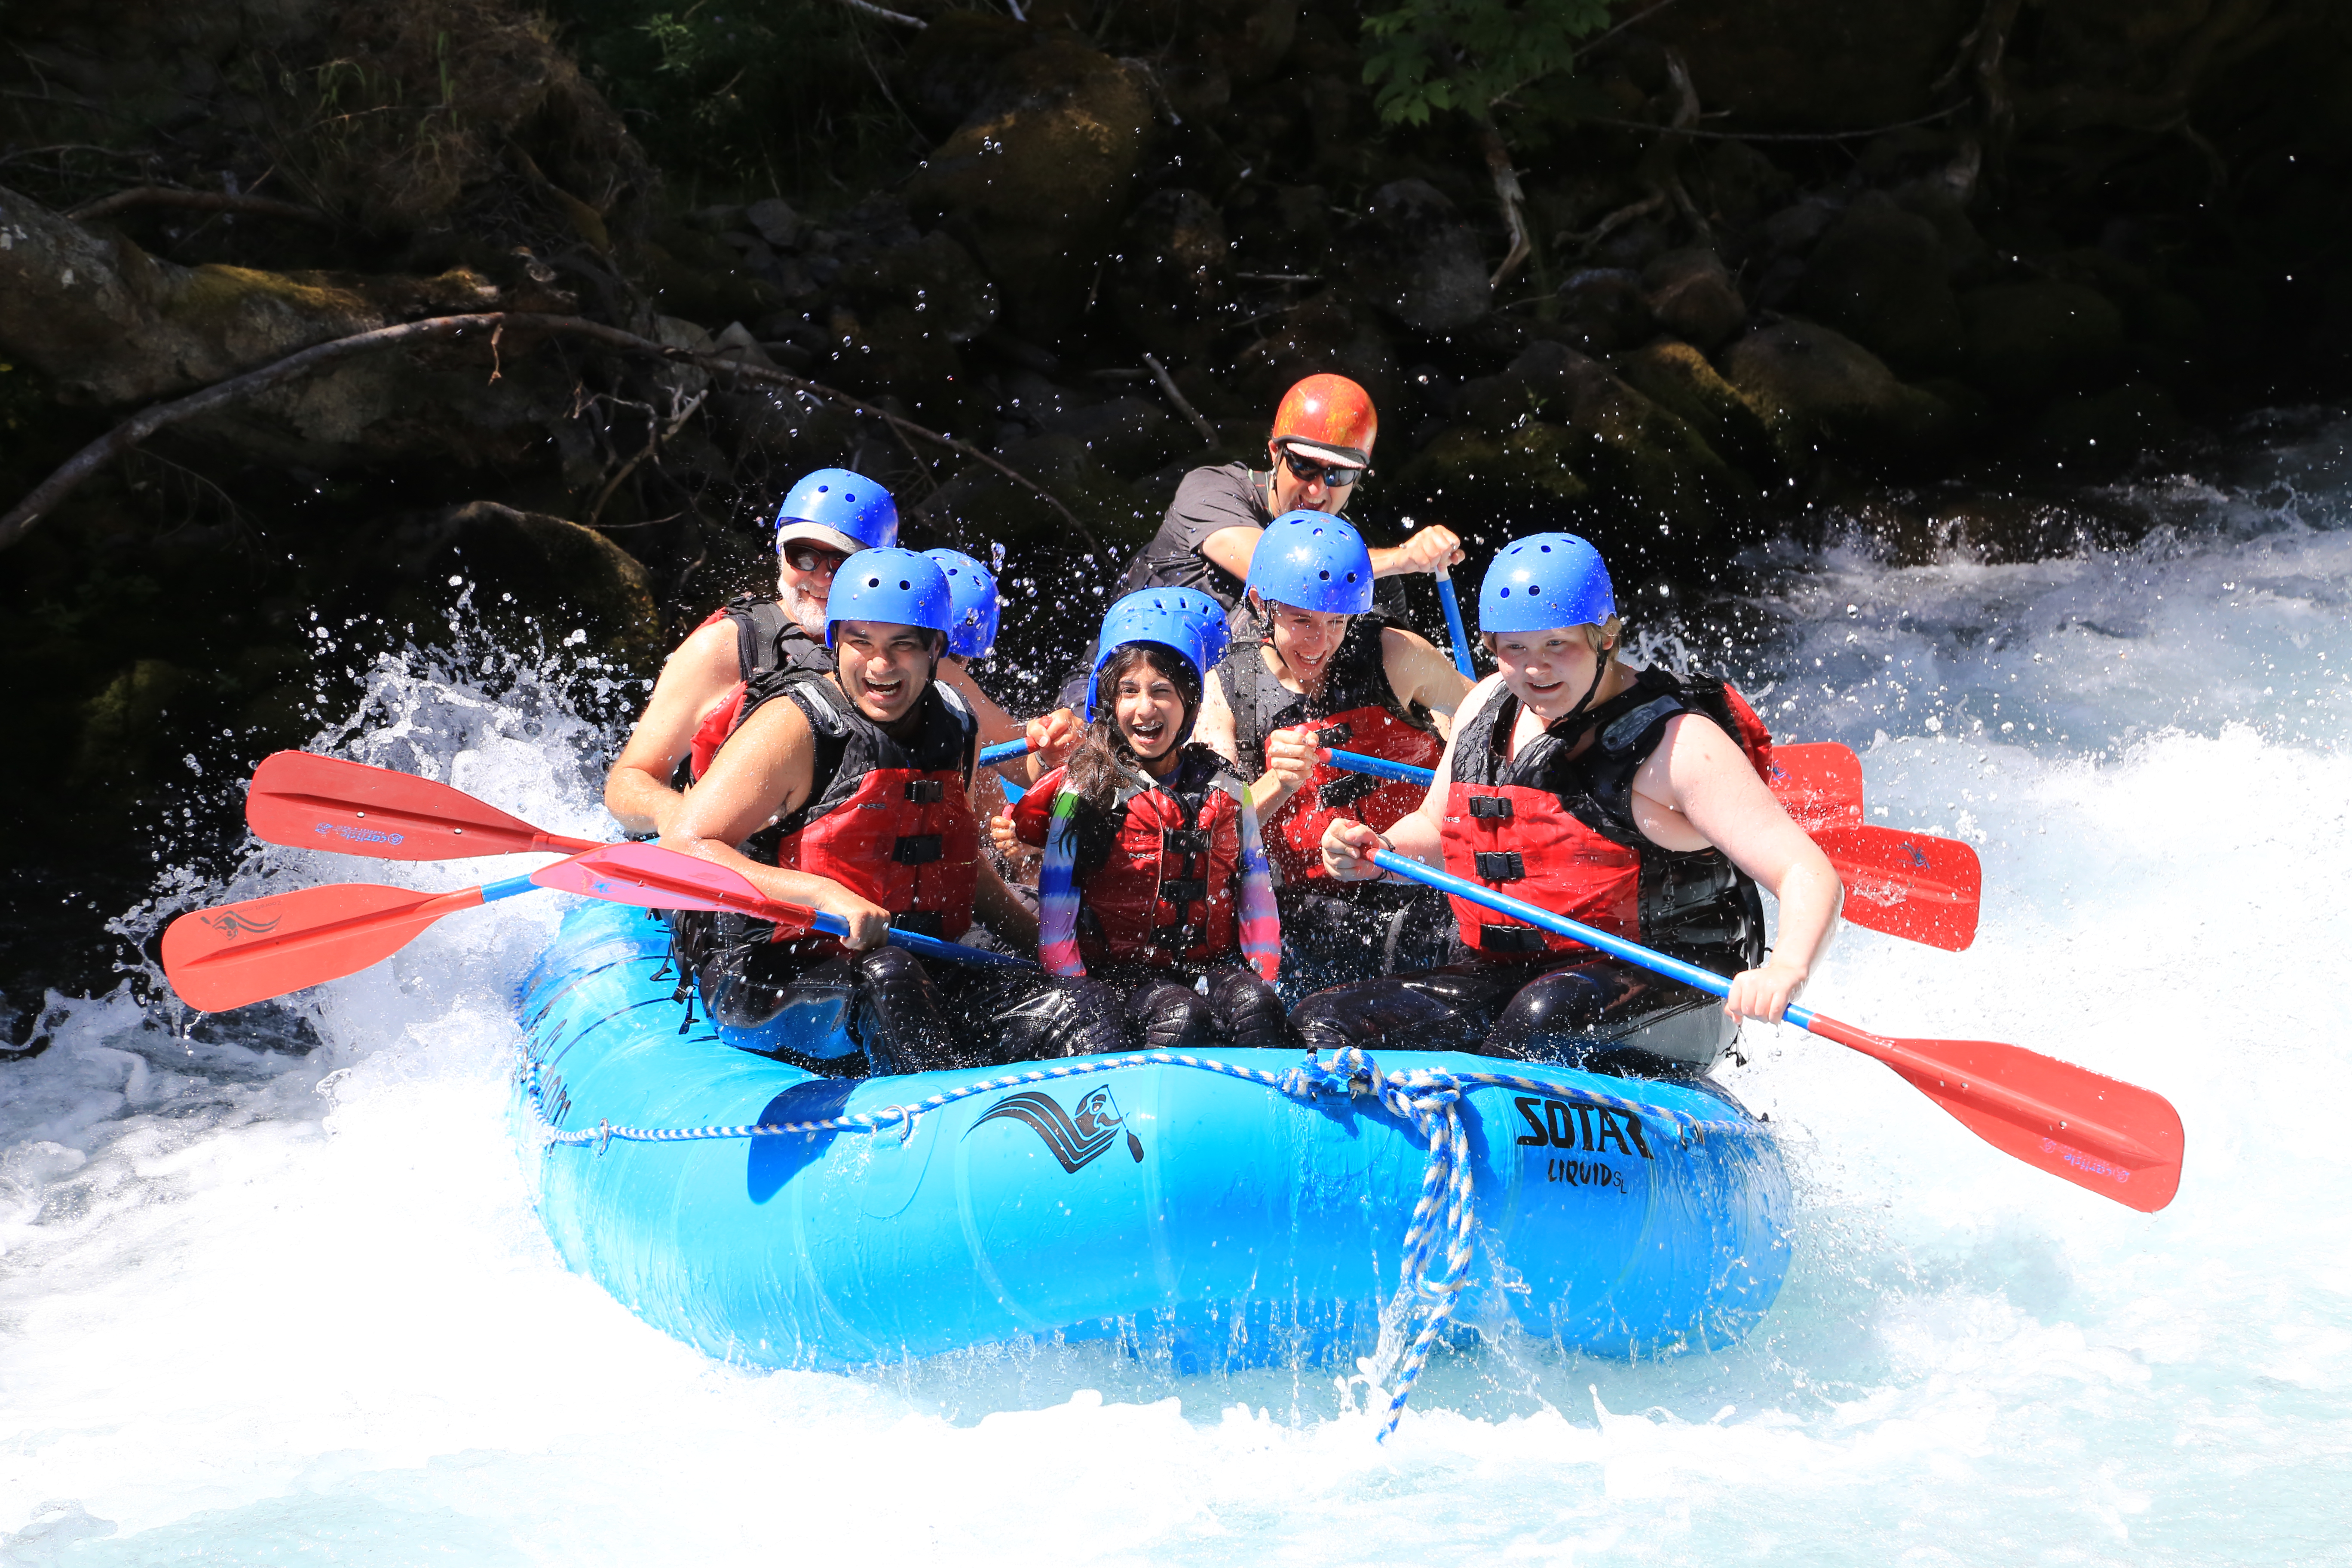 Whitewater Rafting the White Salmon River with Zoller’s Outdoor Odysseys